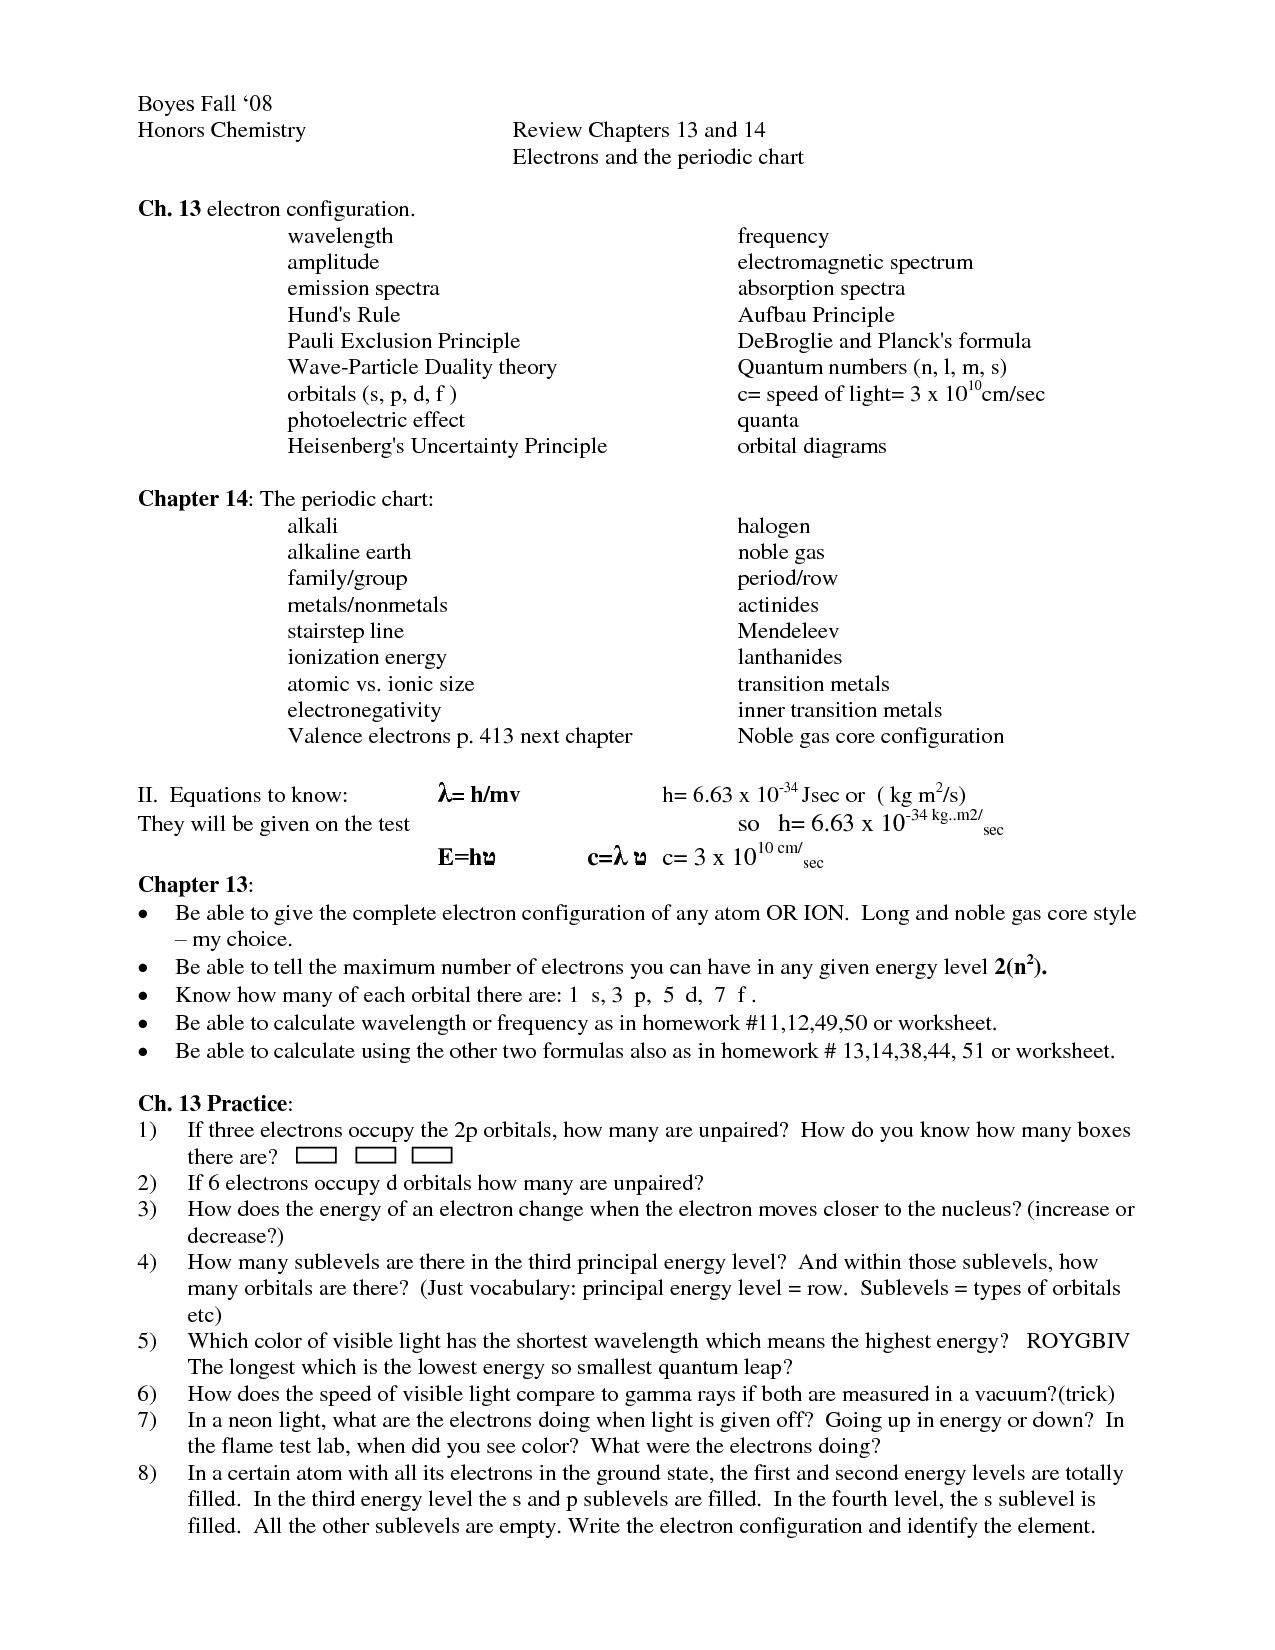 Waves Worksheet 1 Answers